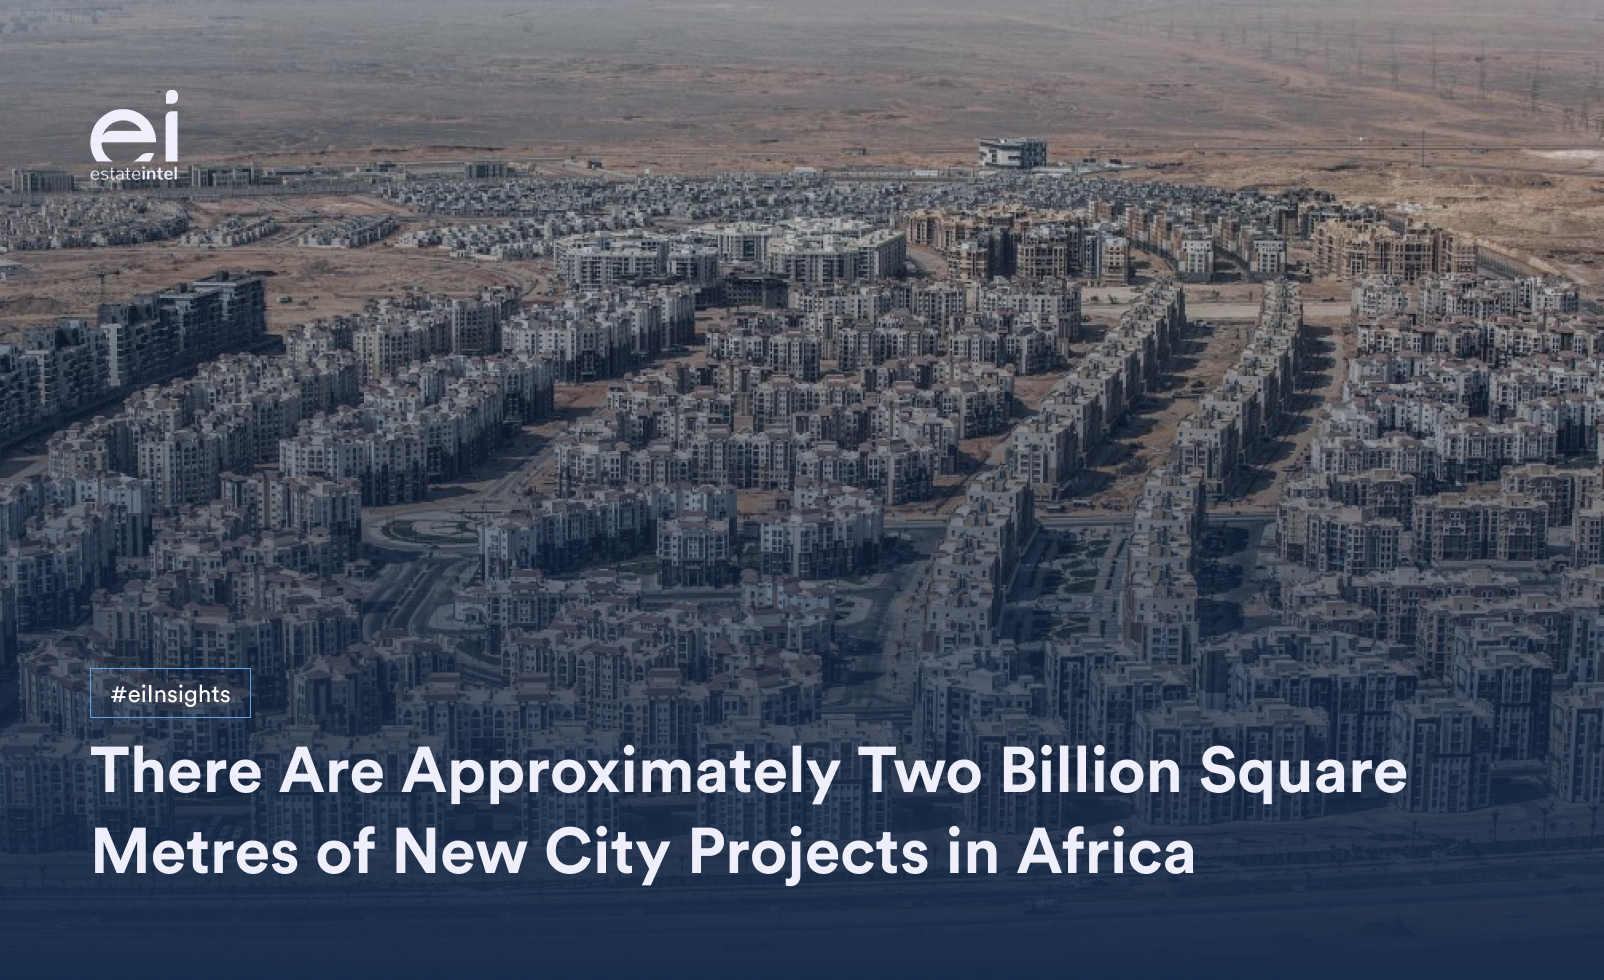 There Are Approximately Two Billion Square Metres of New City Projects in Africa